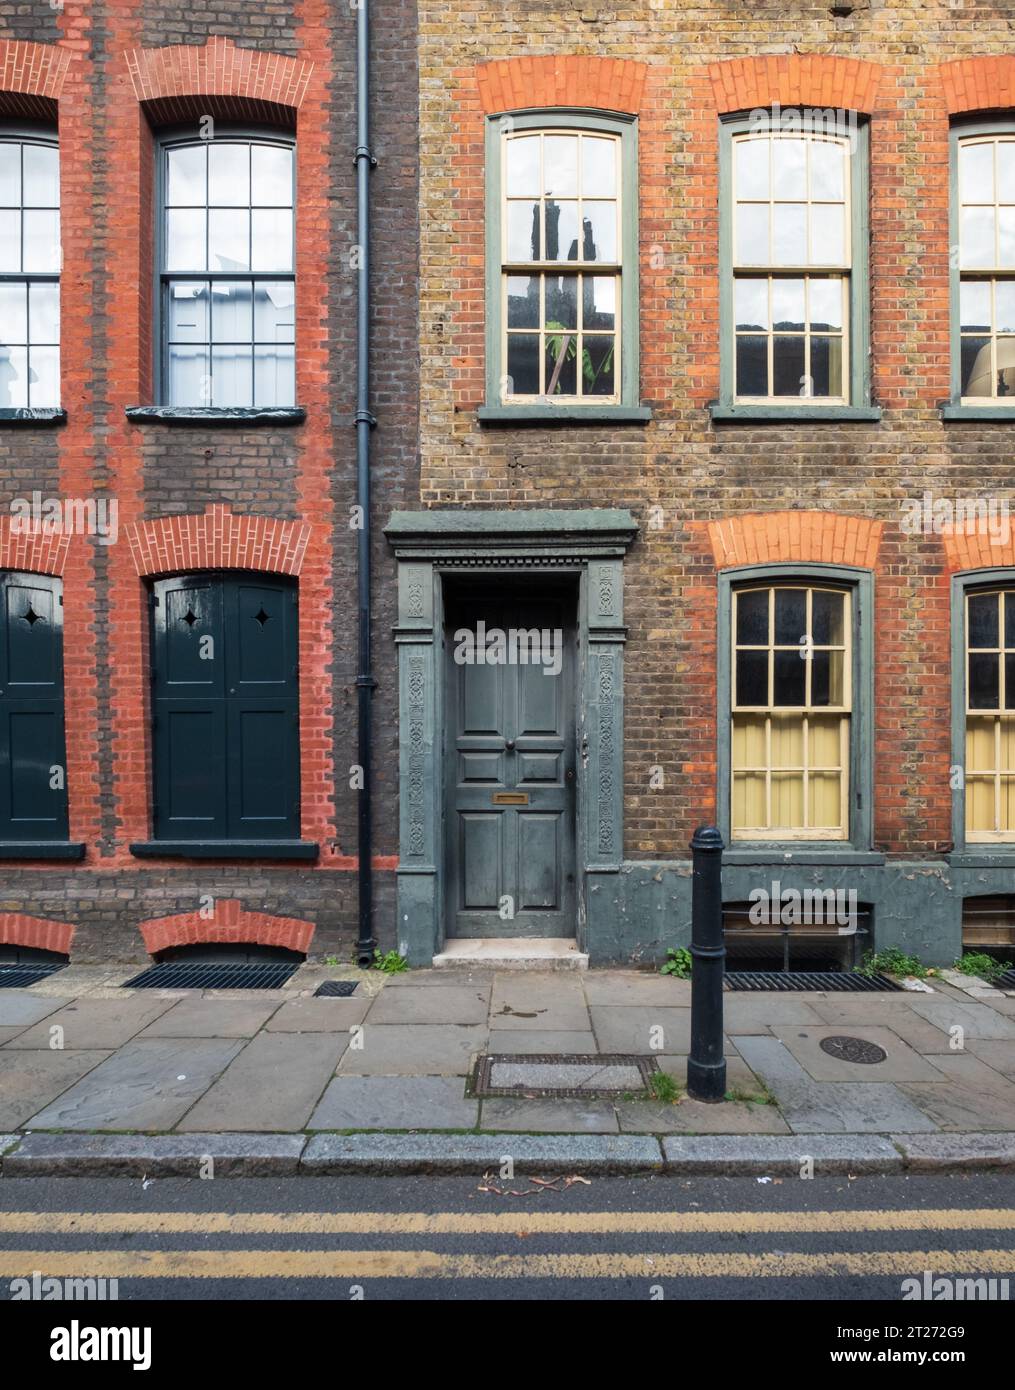 Characterful, colourful historic Huguenot town houses on Fournier Street in Spitalfields, East London, UK. Stock Photo